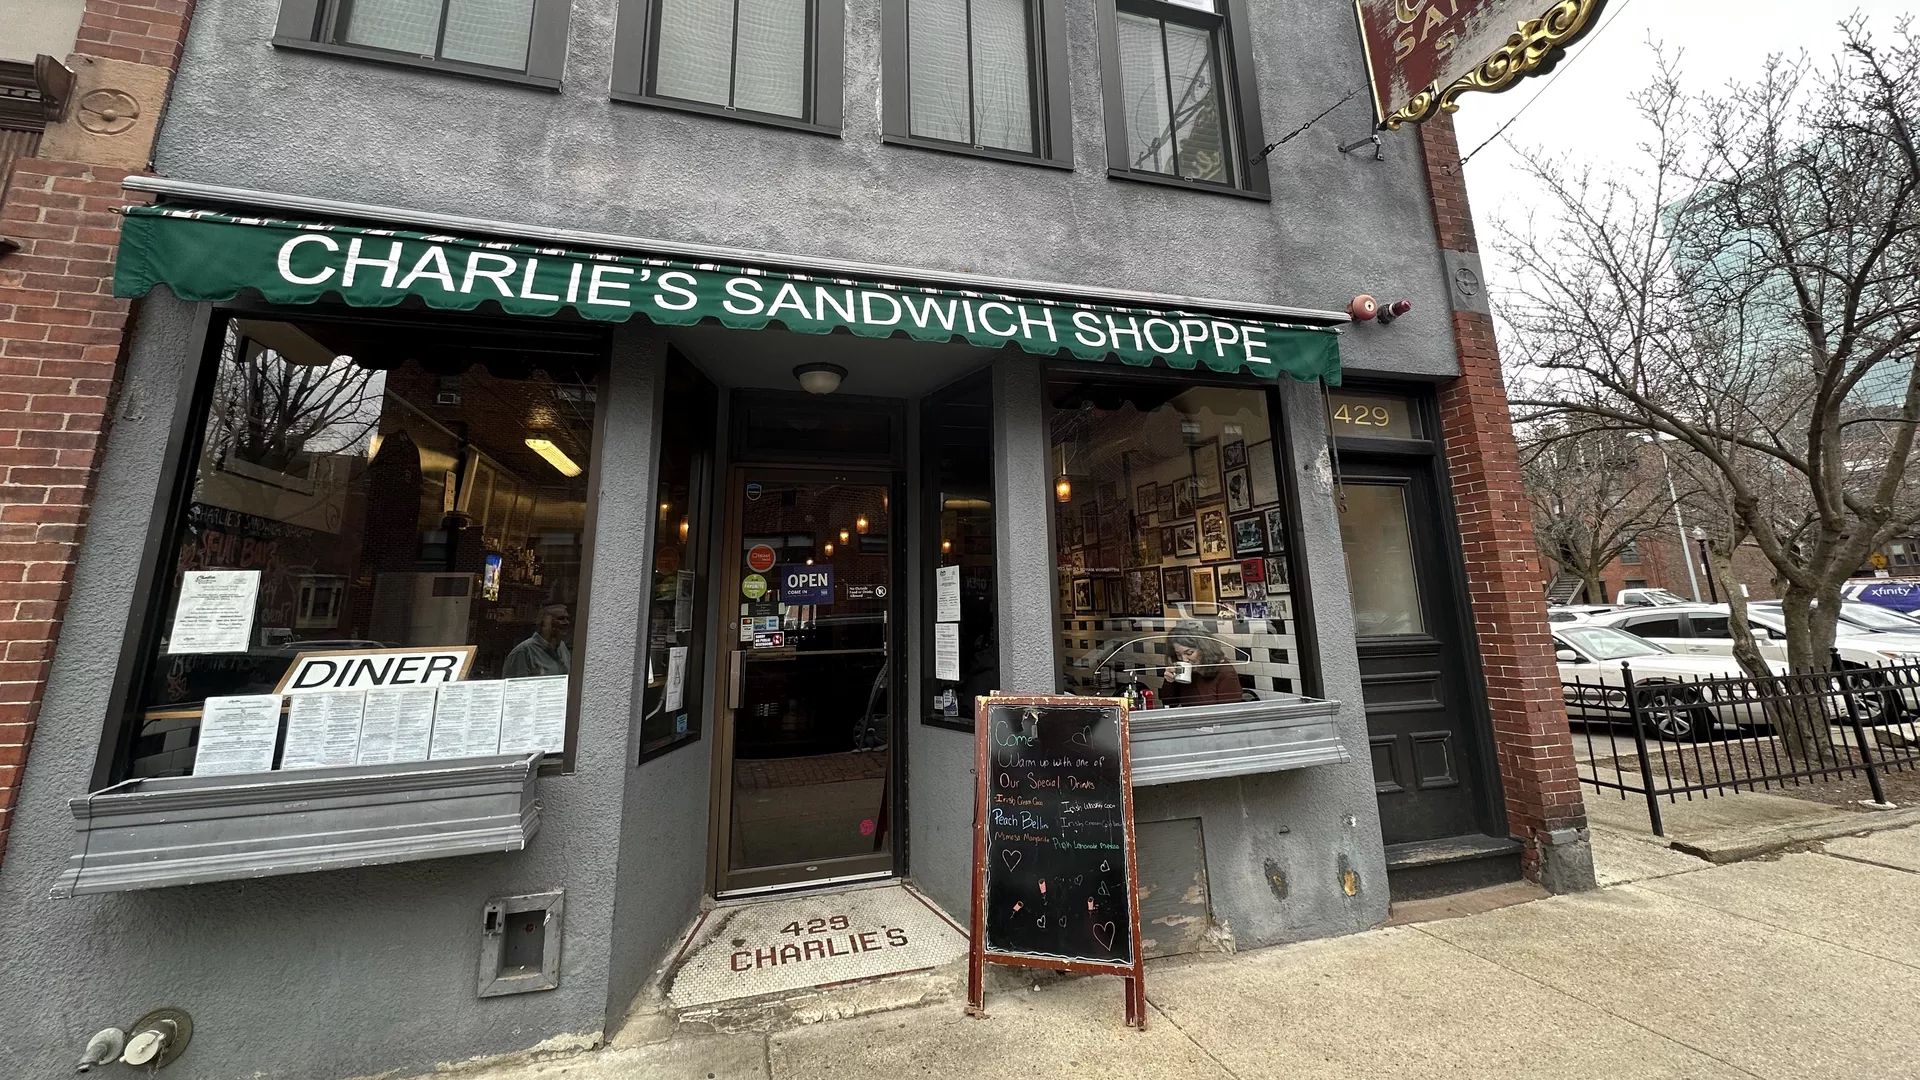 Charlie’s Sandwich Shoppe in Boston's South End. It’s believed to be the first Boston restaurant that served Black customers.